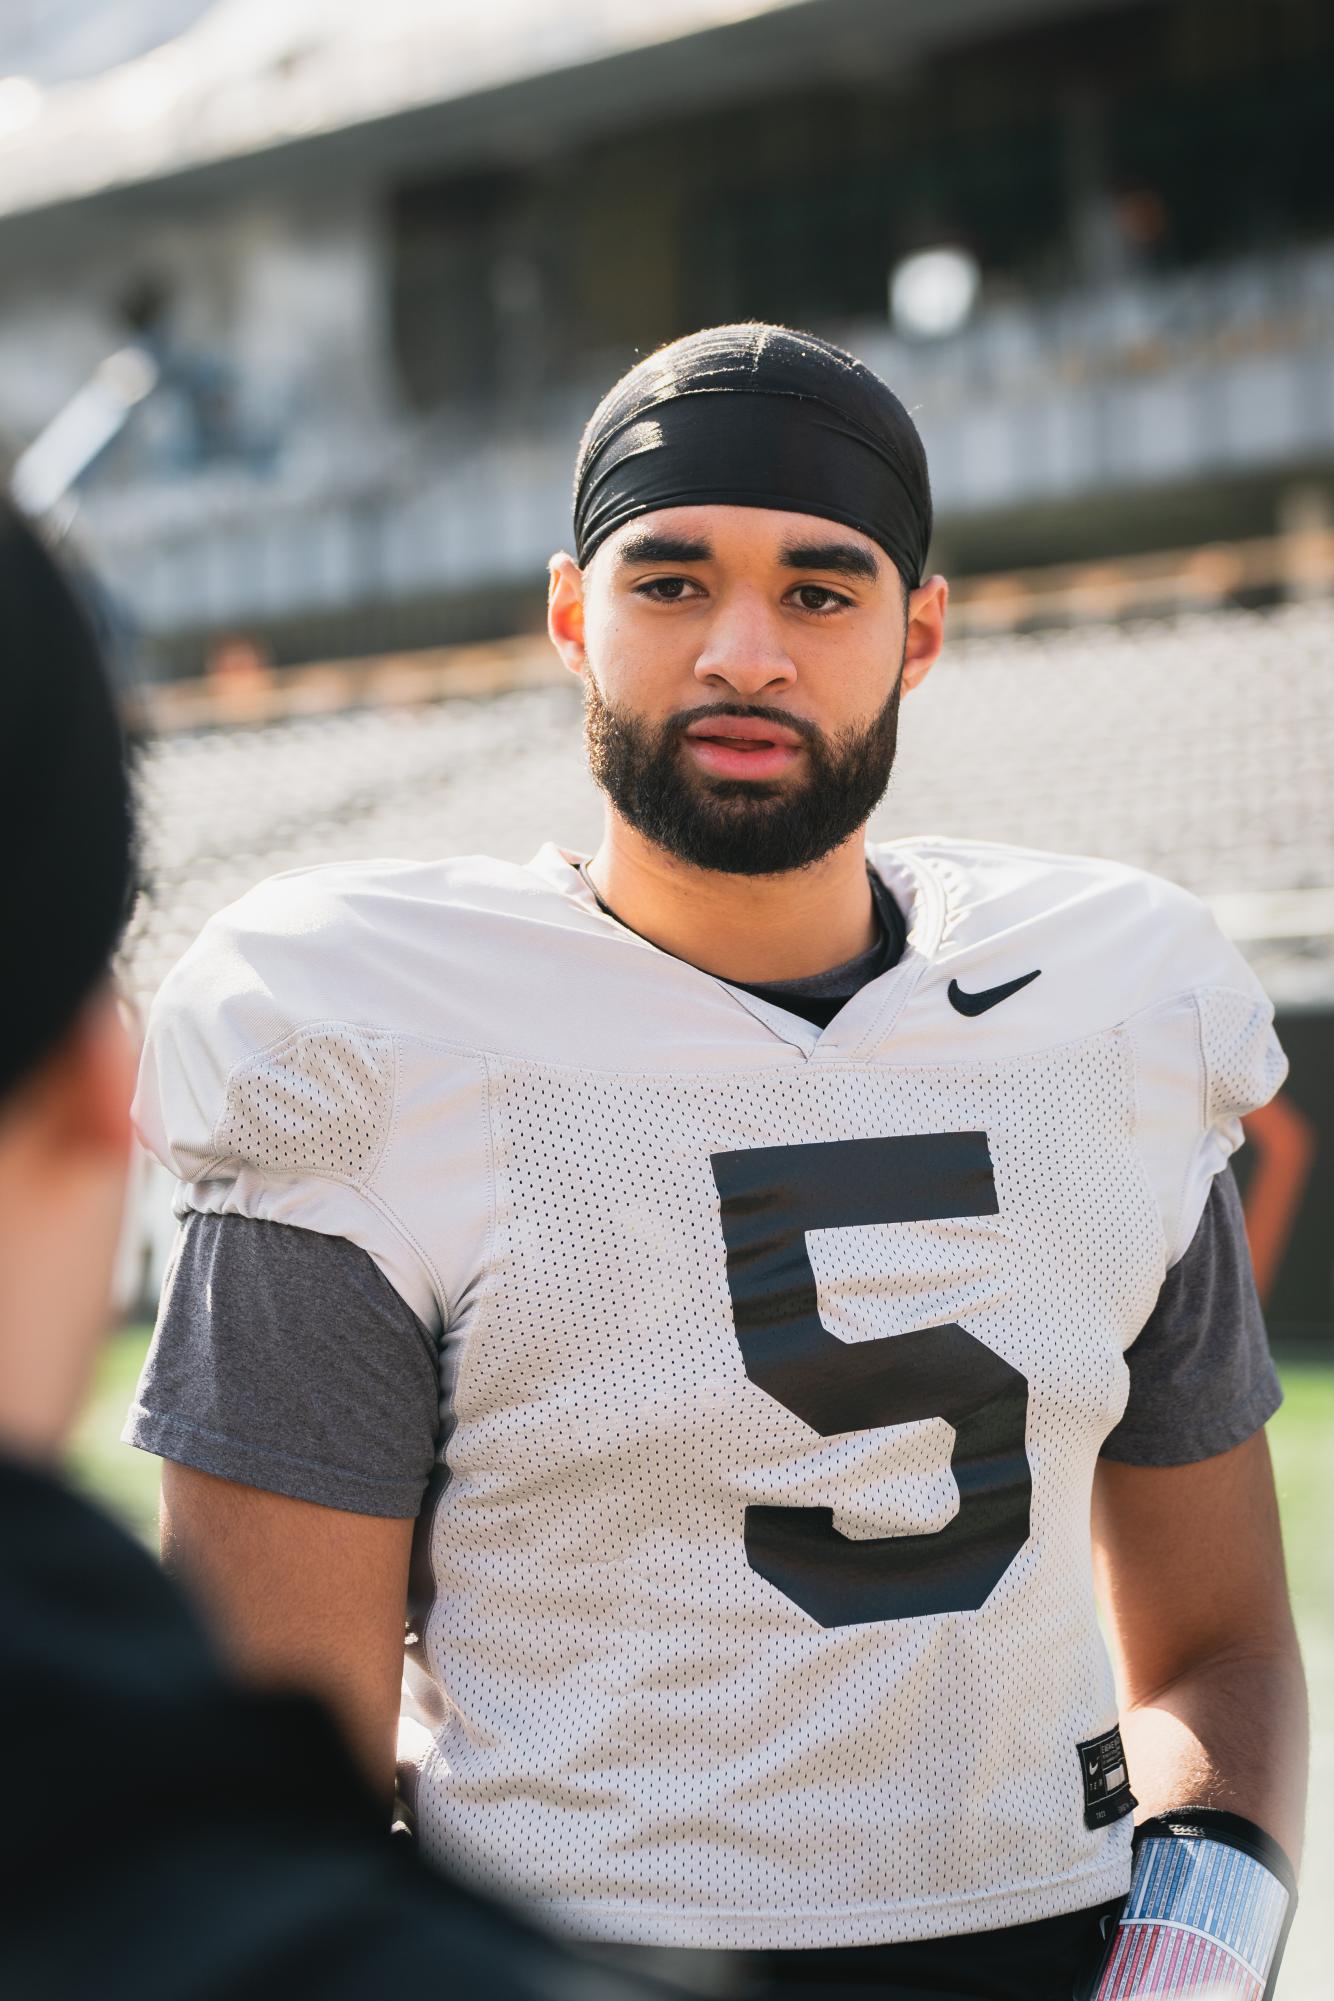 DJ Uiagalelei answers questions from reporters after the second spring practice of the 2023 season at Reser Stadium in Corvallis on March 16. Uiagalelei was drafted by the Los Angeles Dodgers in the 2023 MLB Draft.